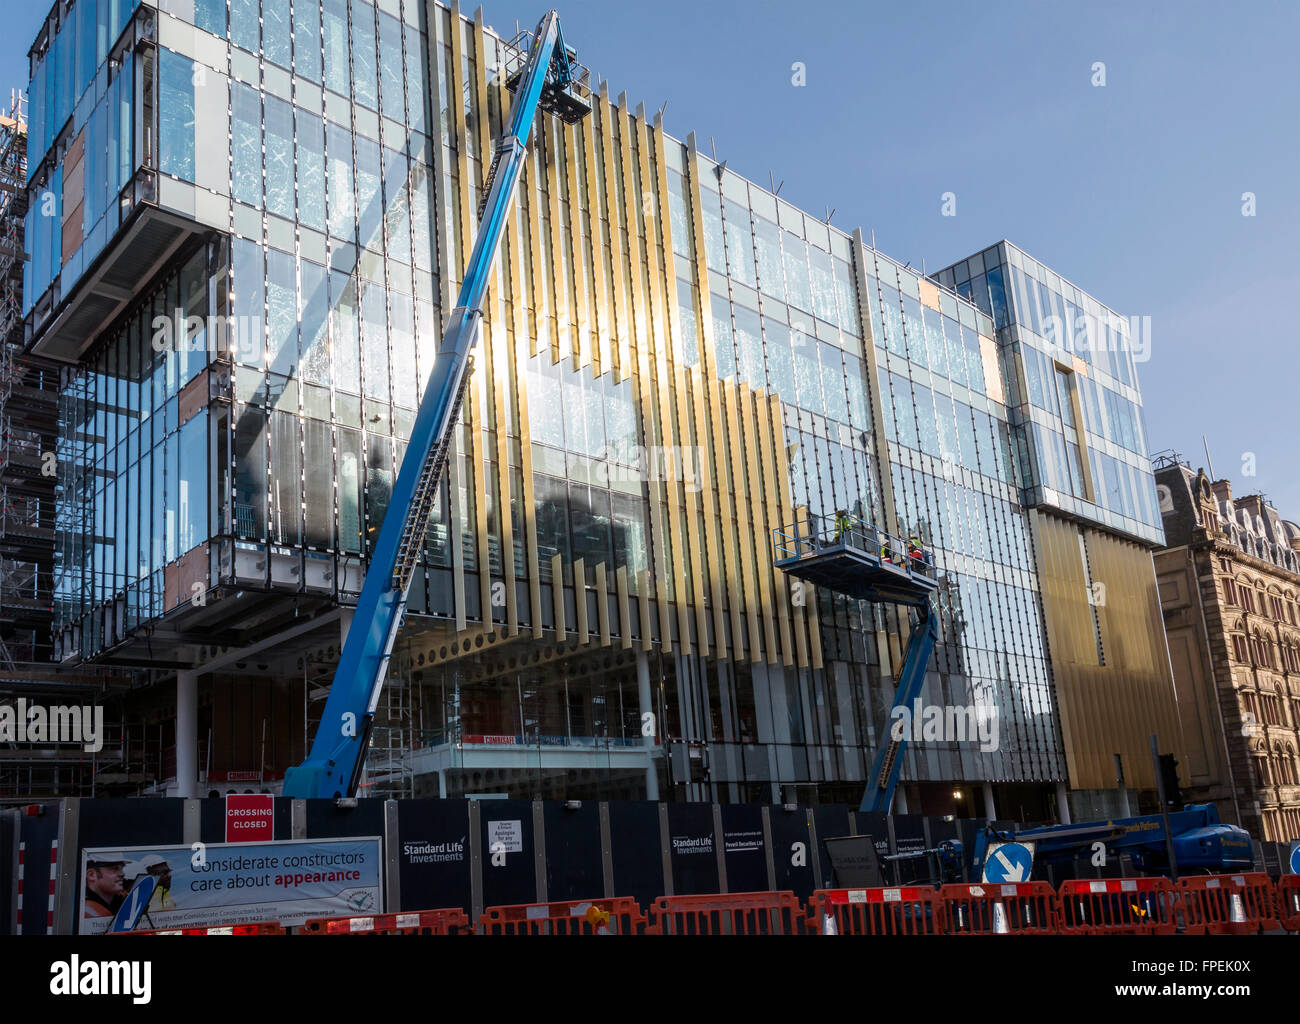 Construction in progress on the new Standard Life building in St Andrew's Square and South St Andrew's Street Central Edinburgh. Stock Photo